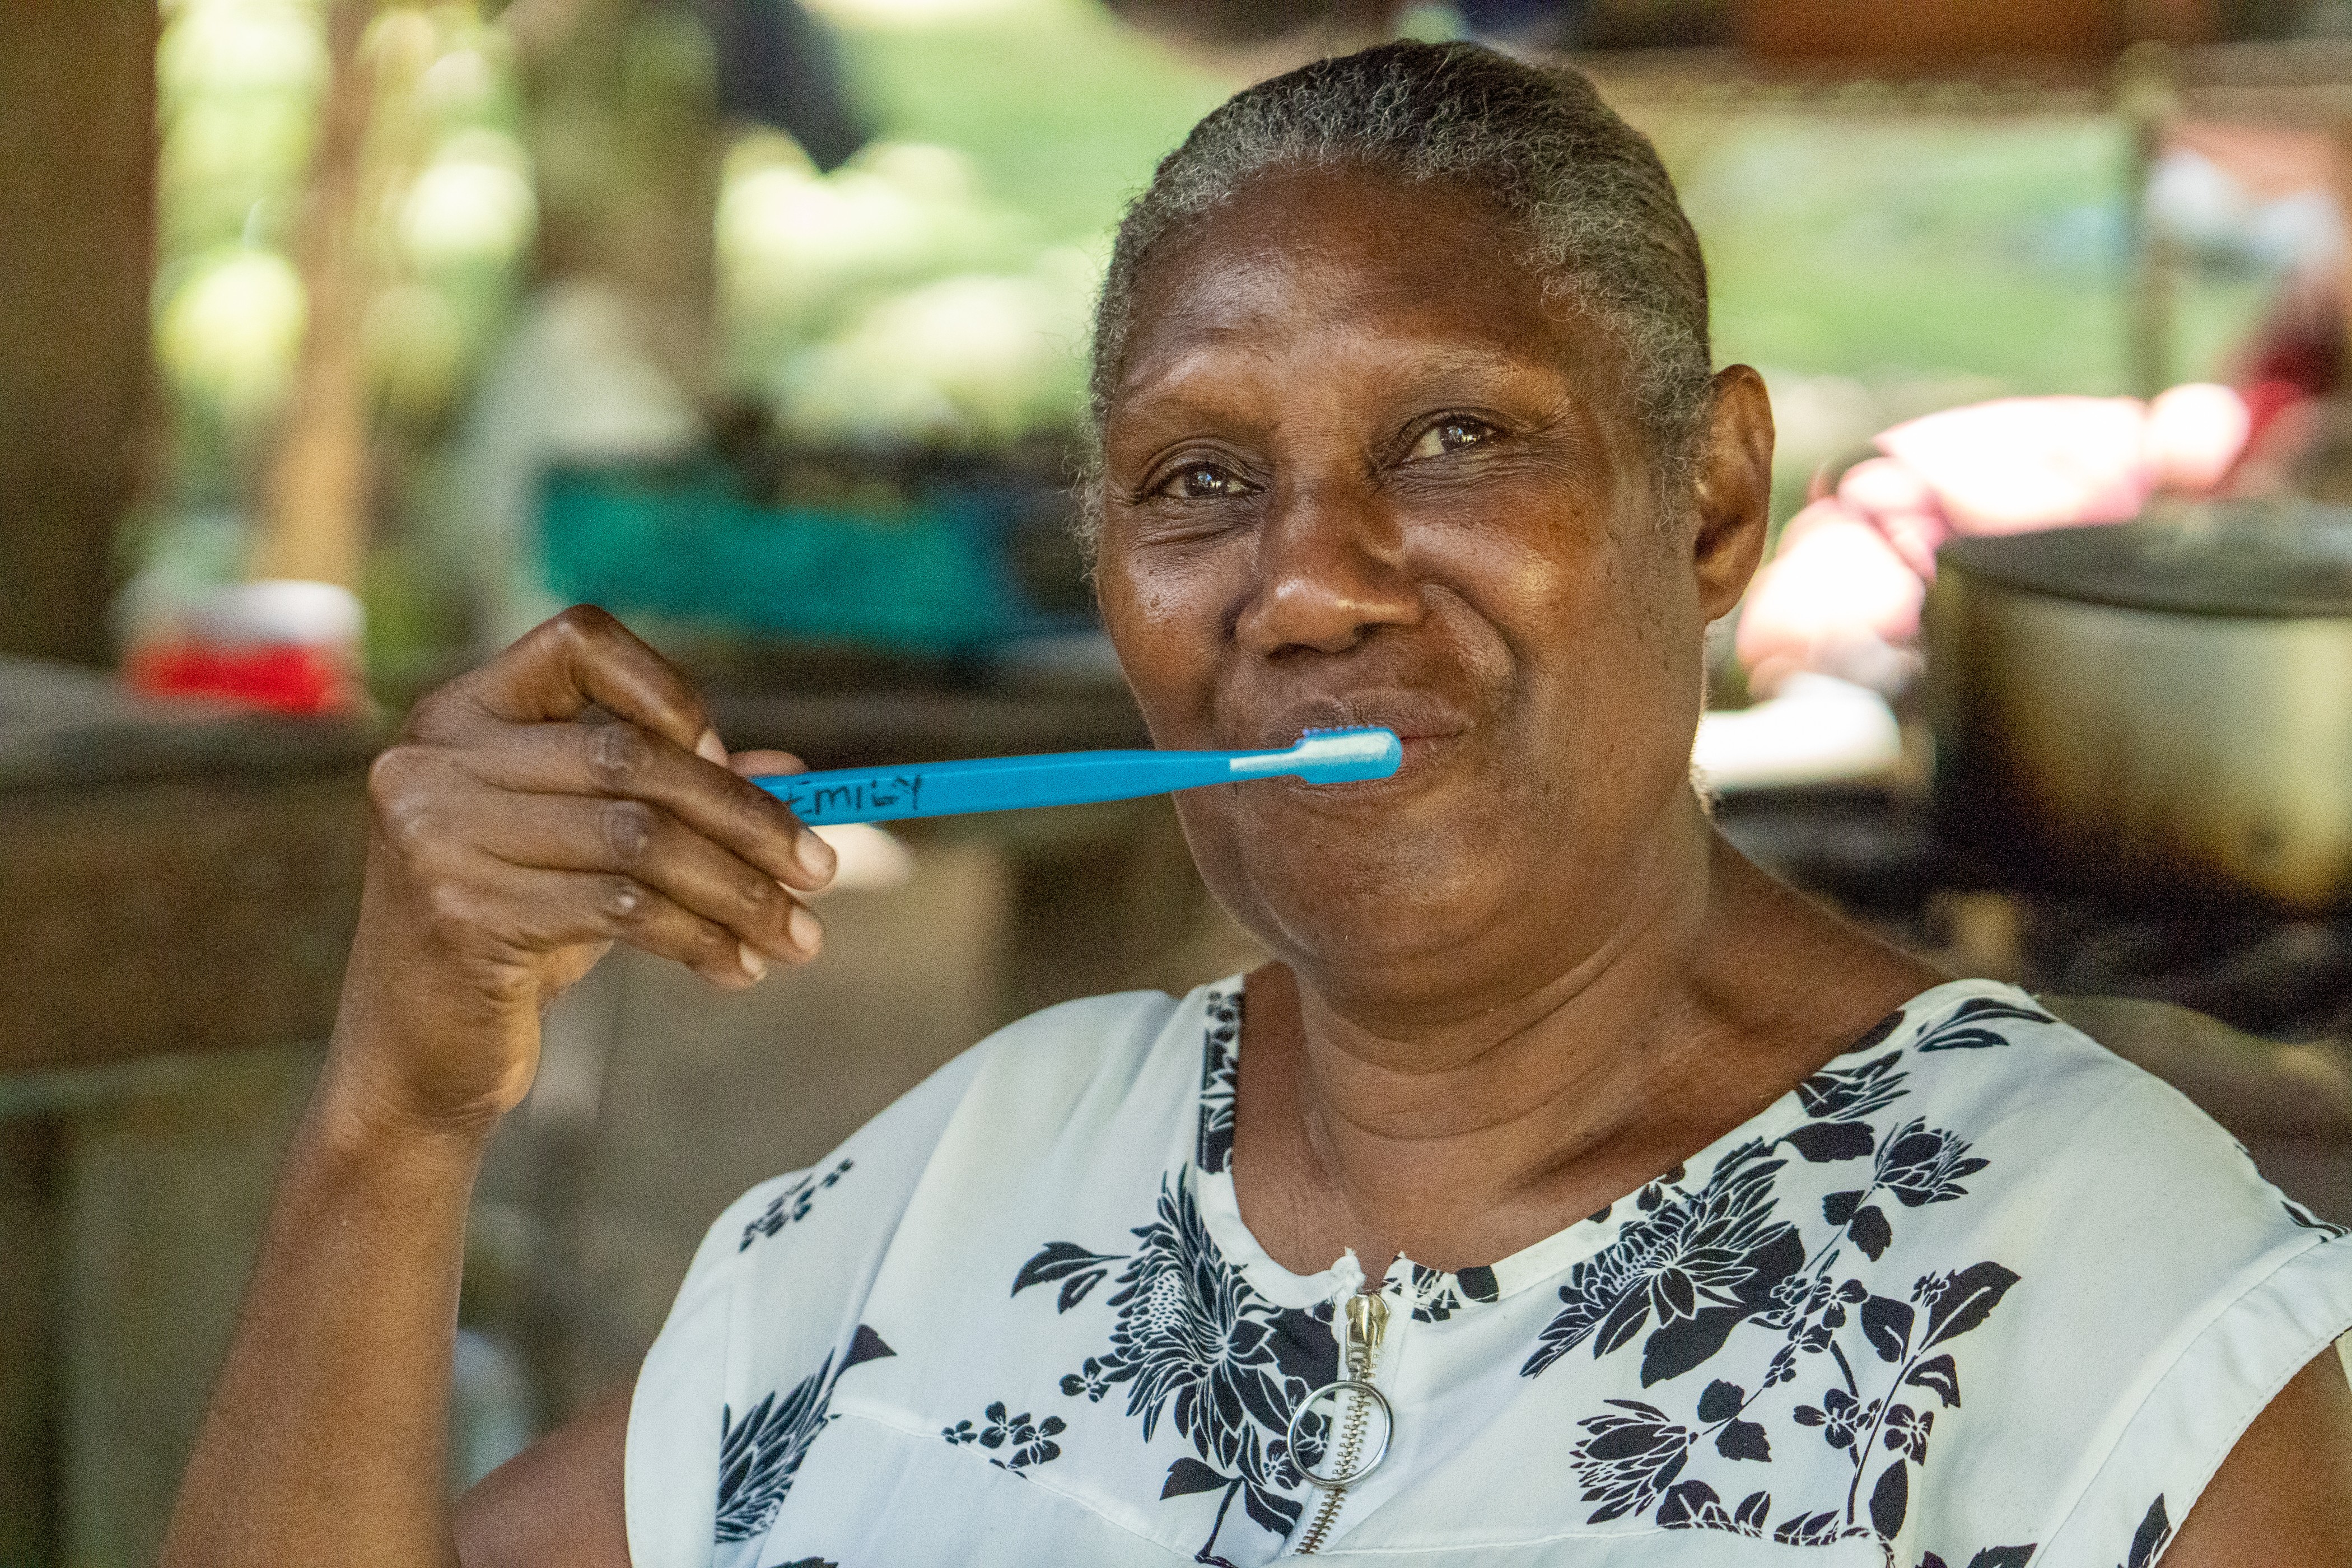 Improving oral health and well-being in Vanuatu  through the community promotion of toothbrushing  with fluoride toothpaste and healthier food choices